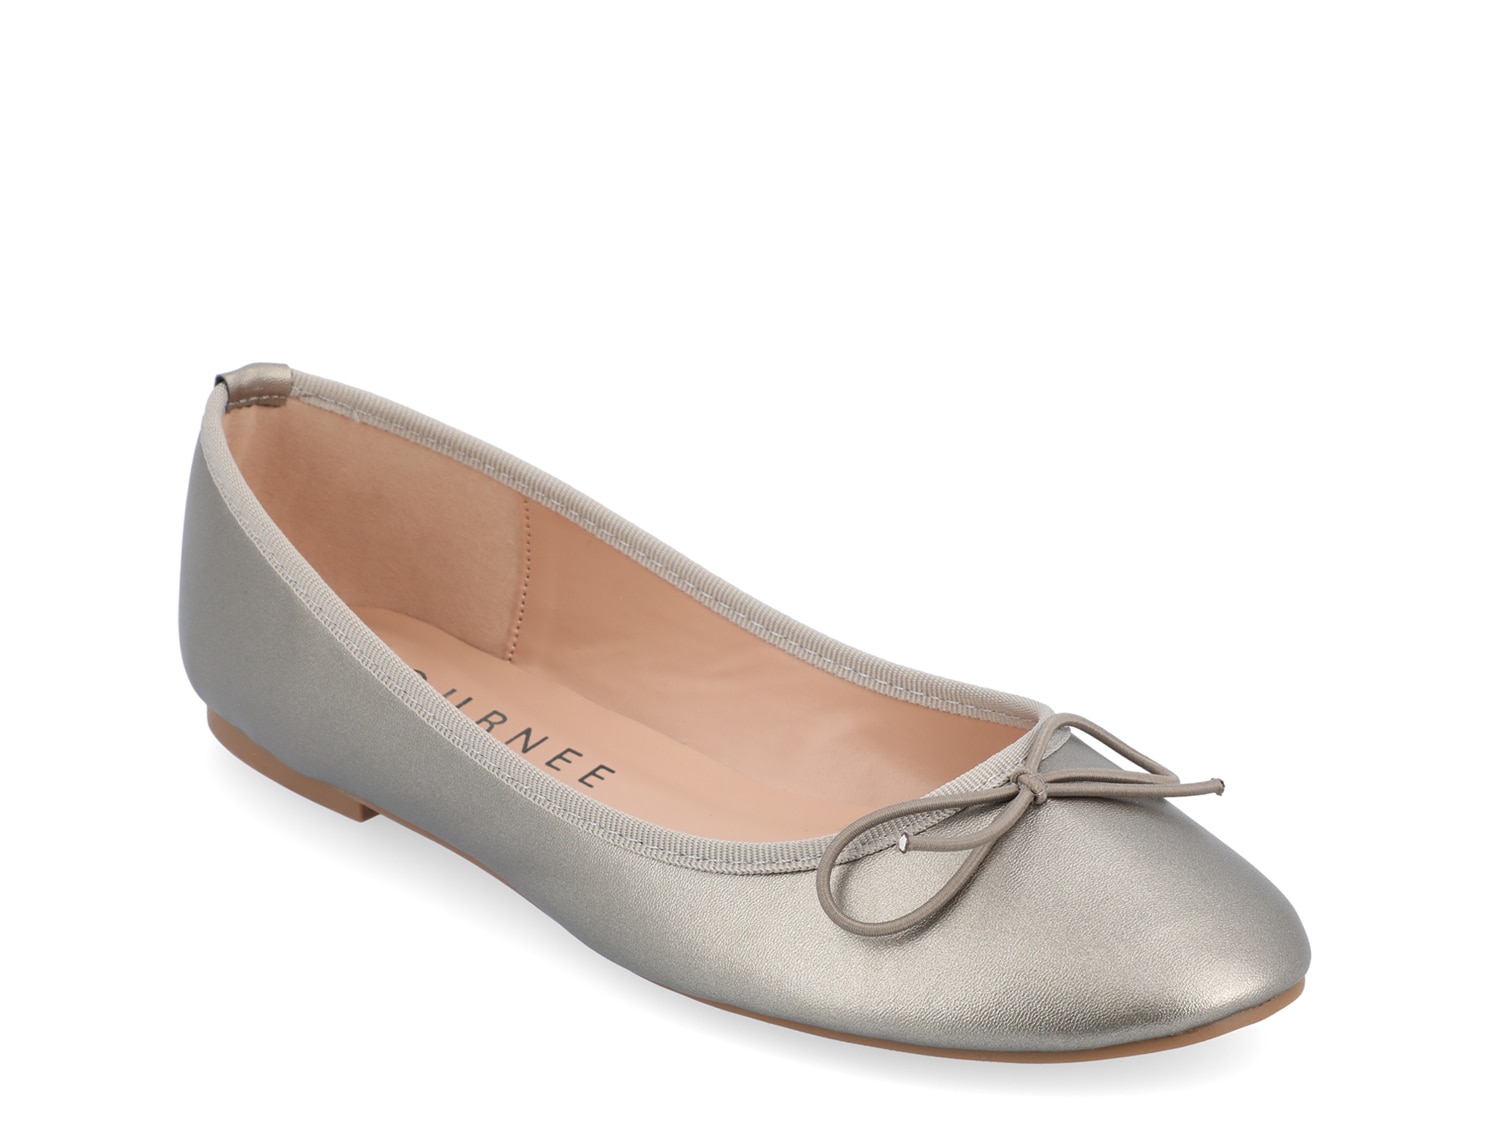 Journee Collection Vika Ballet Flat - Free Shipping | DSW